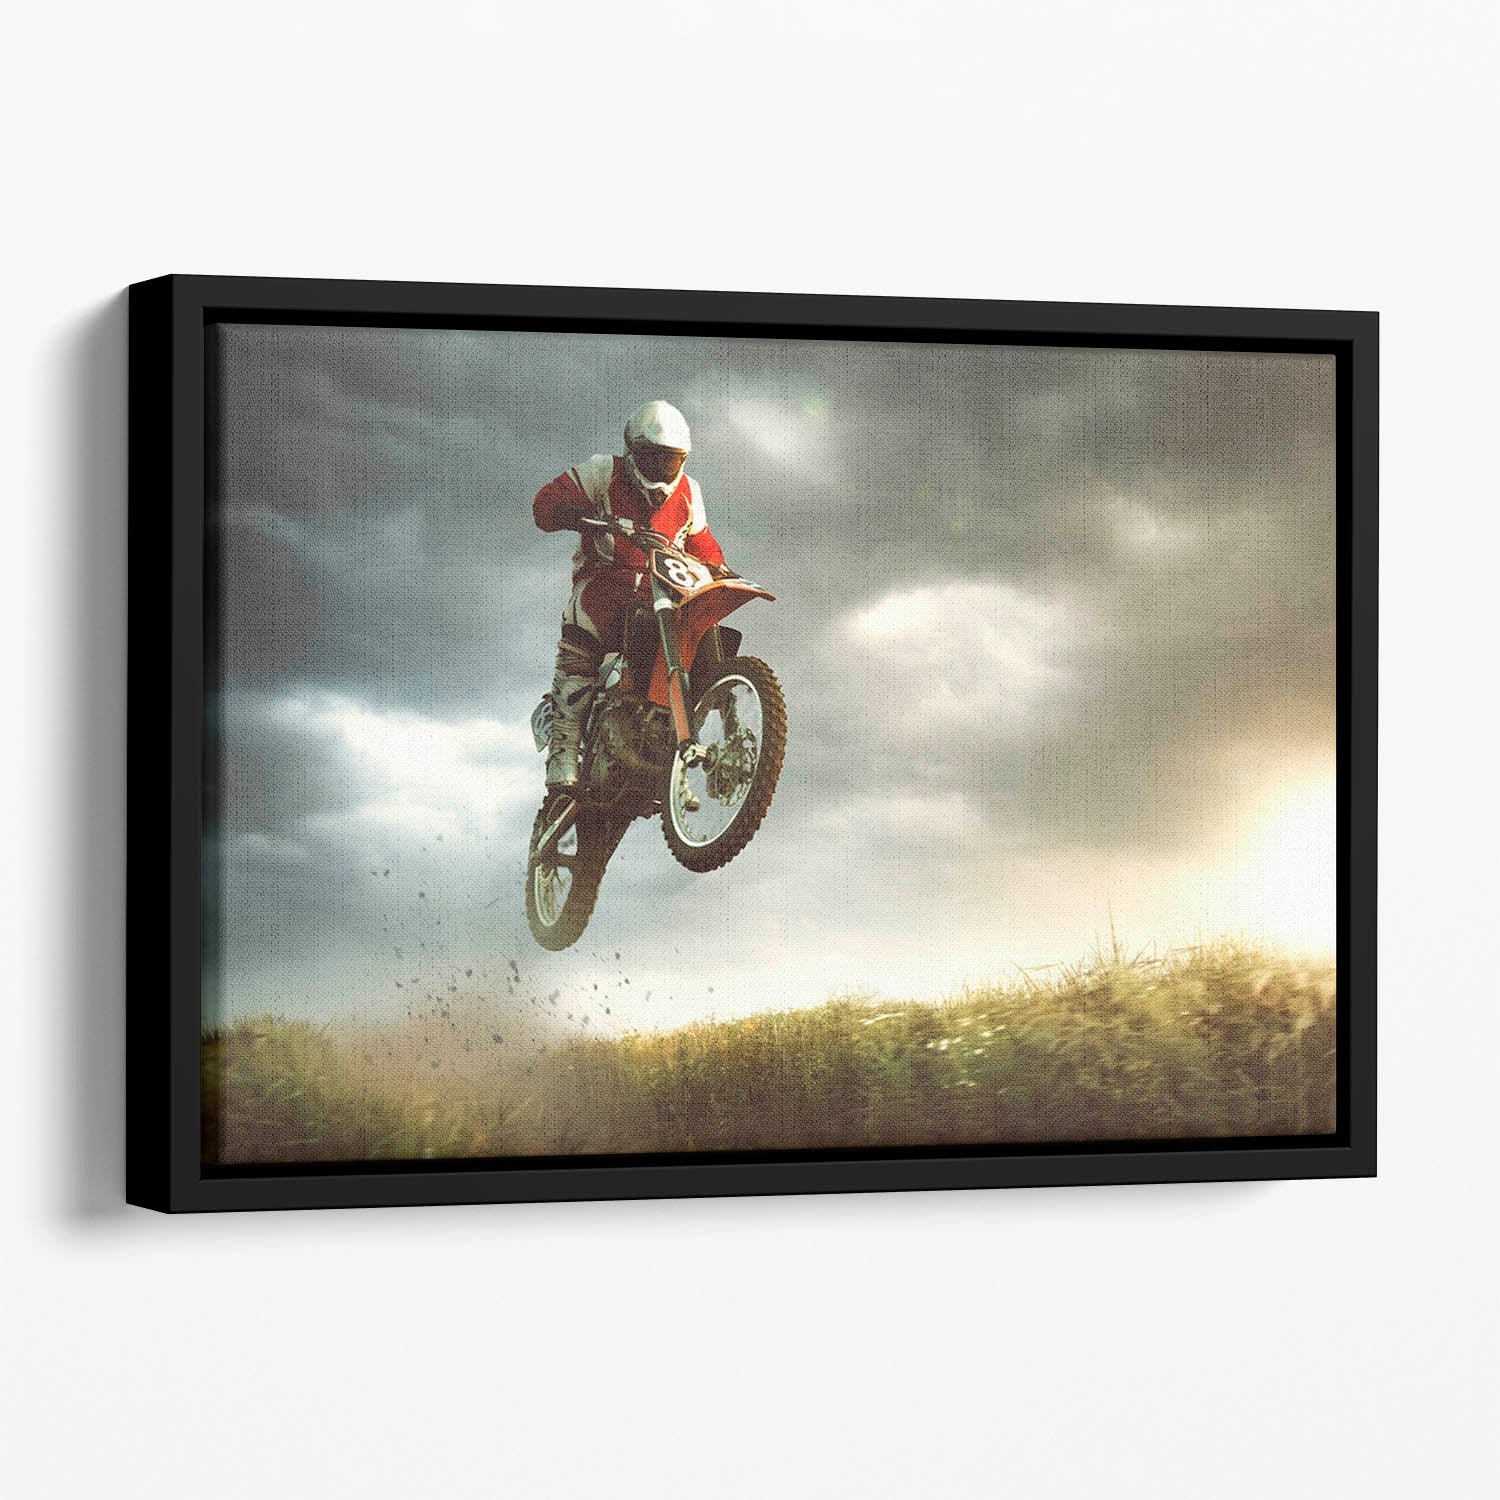 Motorbike jumps in the air Floating Framed Canvas